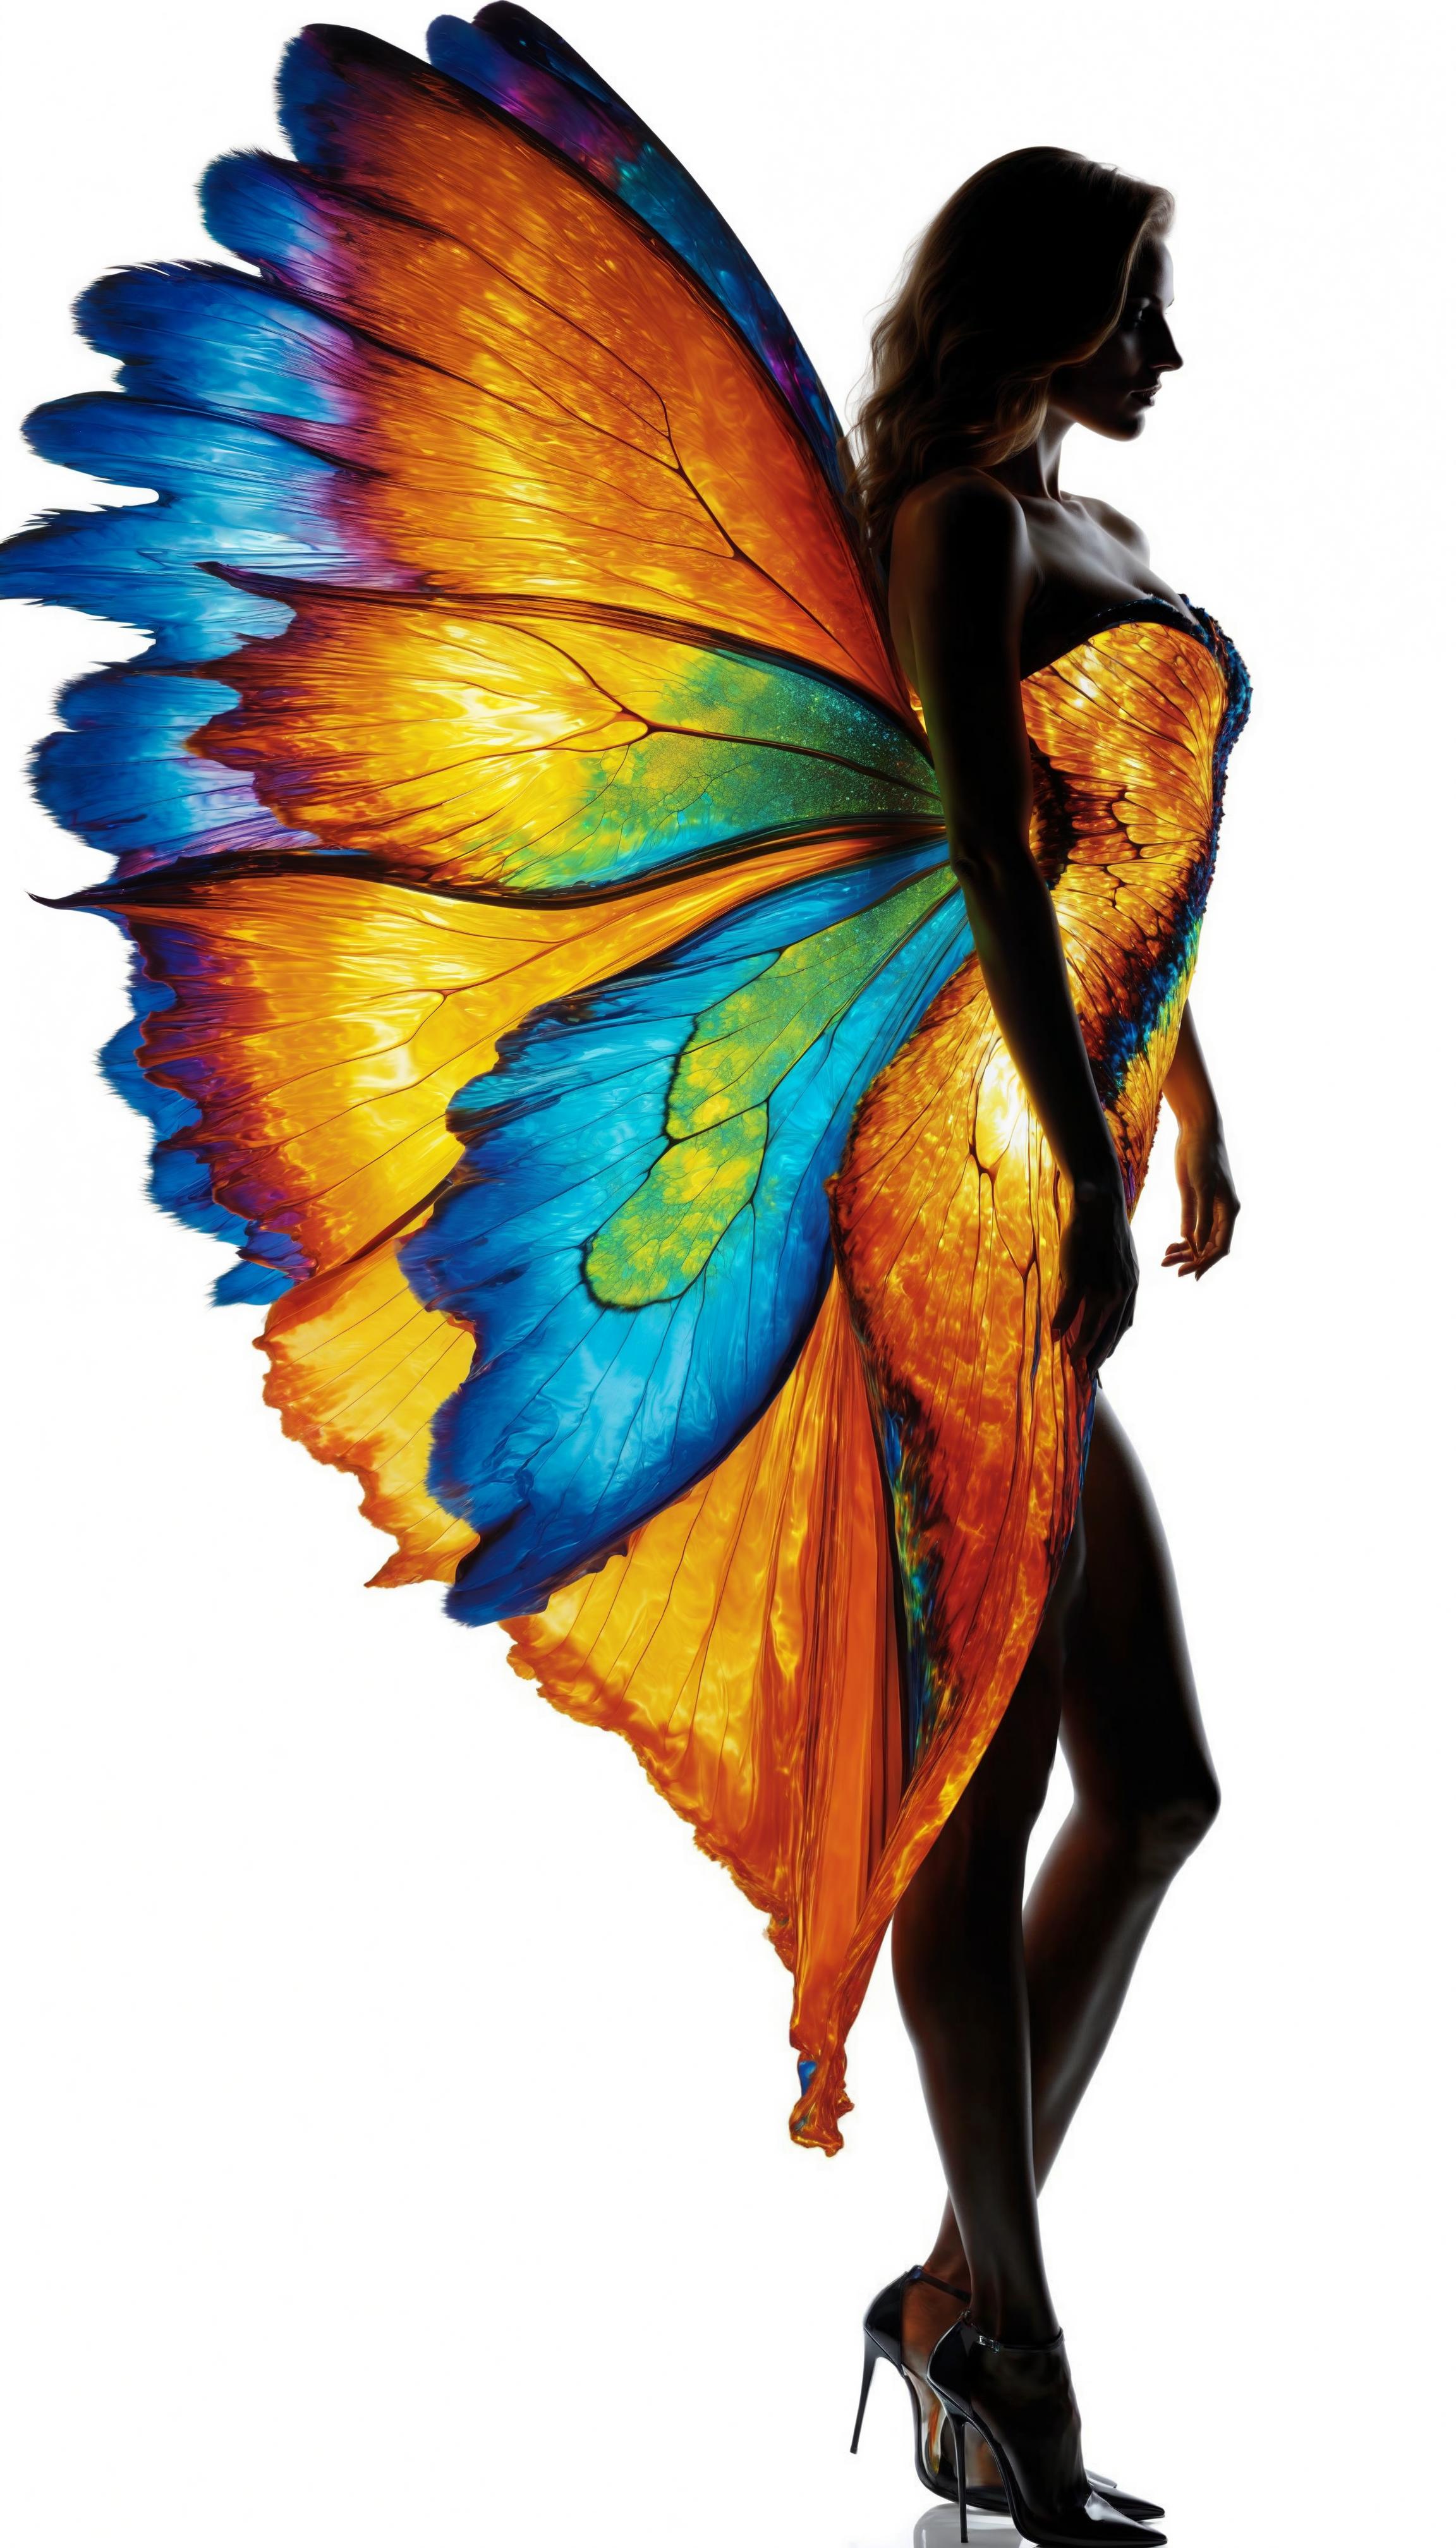 Woman in a Butterfly Dress with Vibrant Colors and a V-Cut Bikini Bottom.